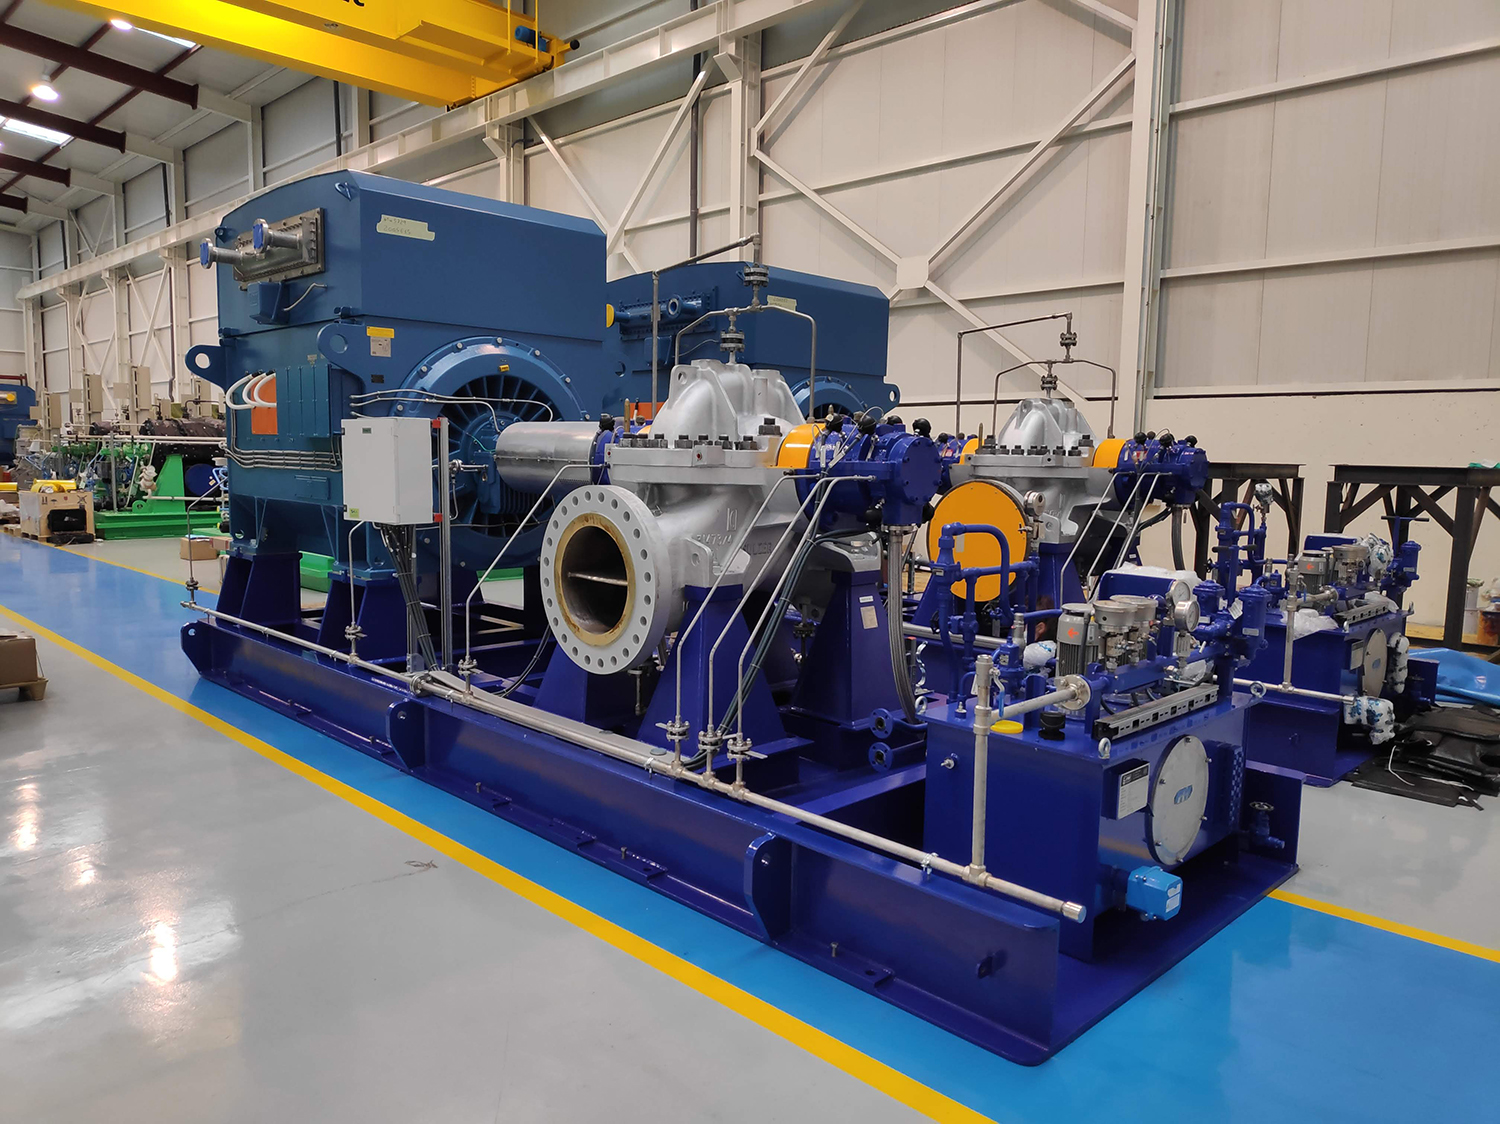 As a leading pump specialist, Sulzer has decades of experience in the RO sector